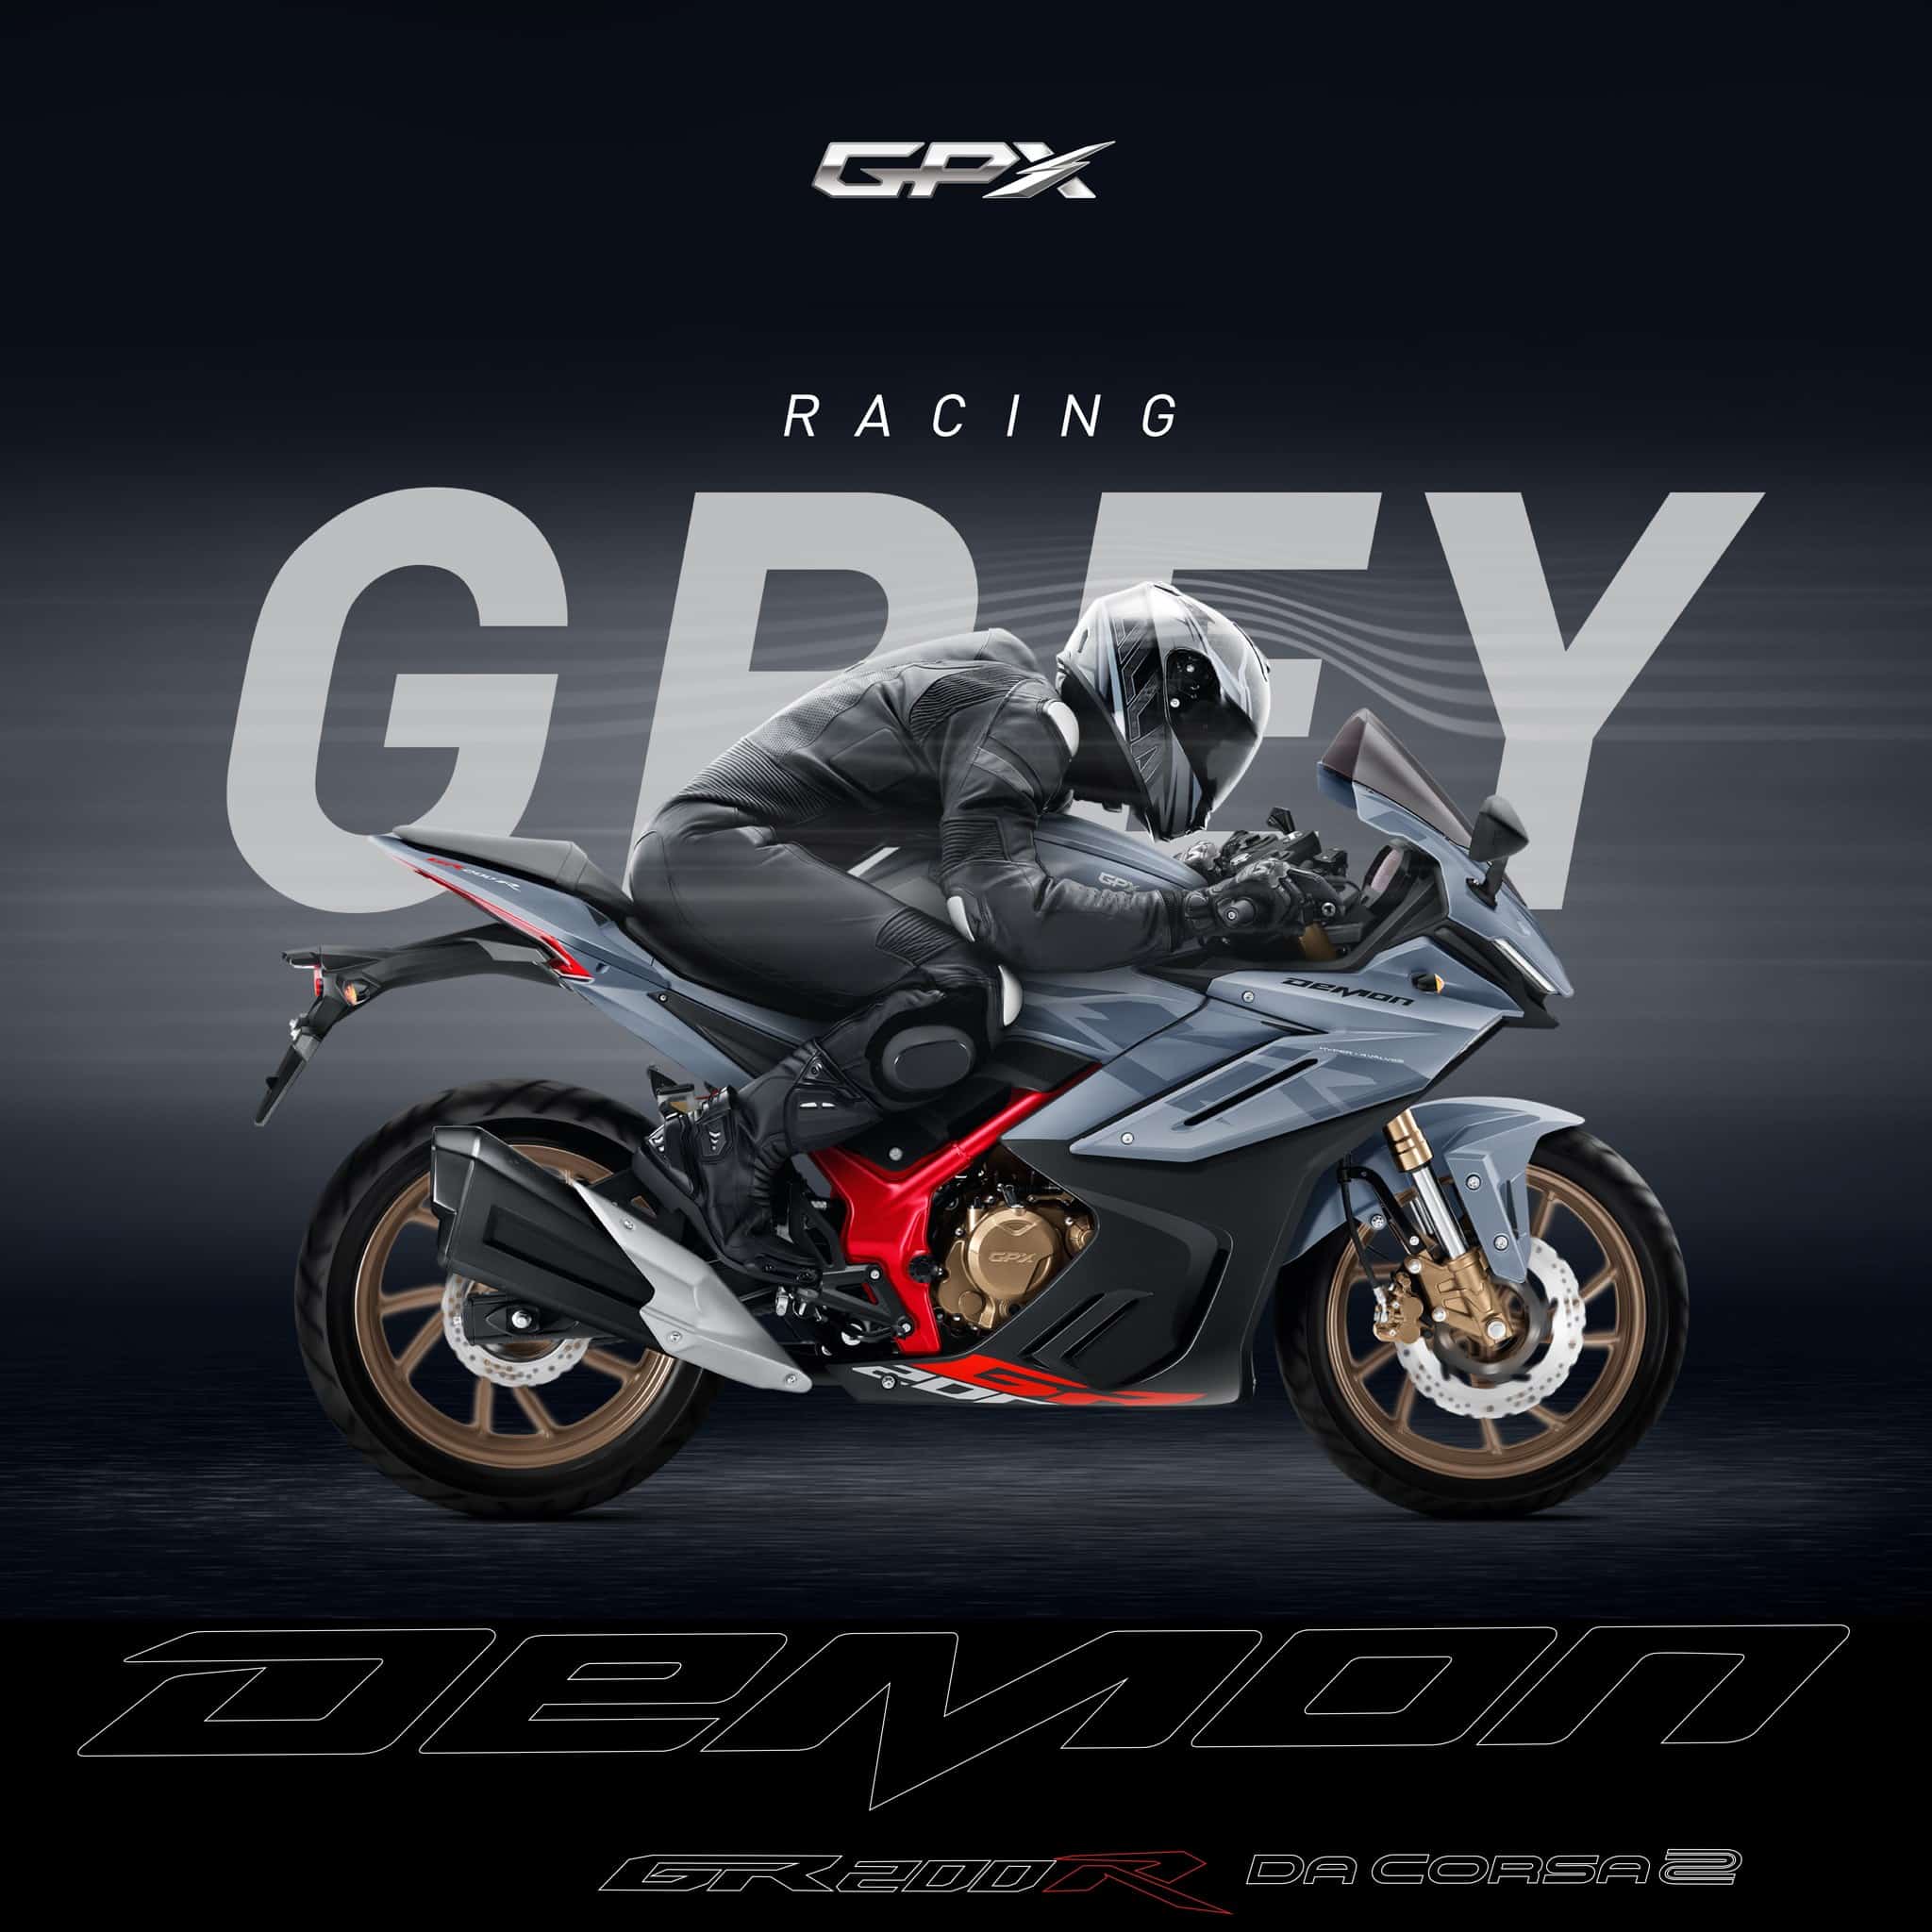 GPX Demon GR200R Da Corsa 2 Makes Official Debut - Price Revealed! - close-up